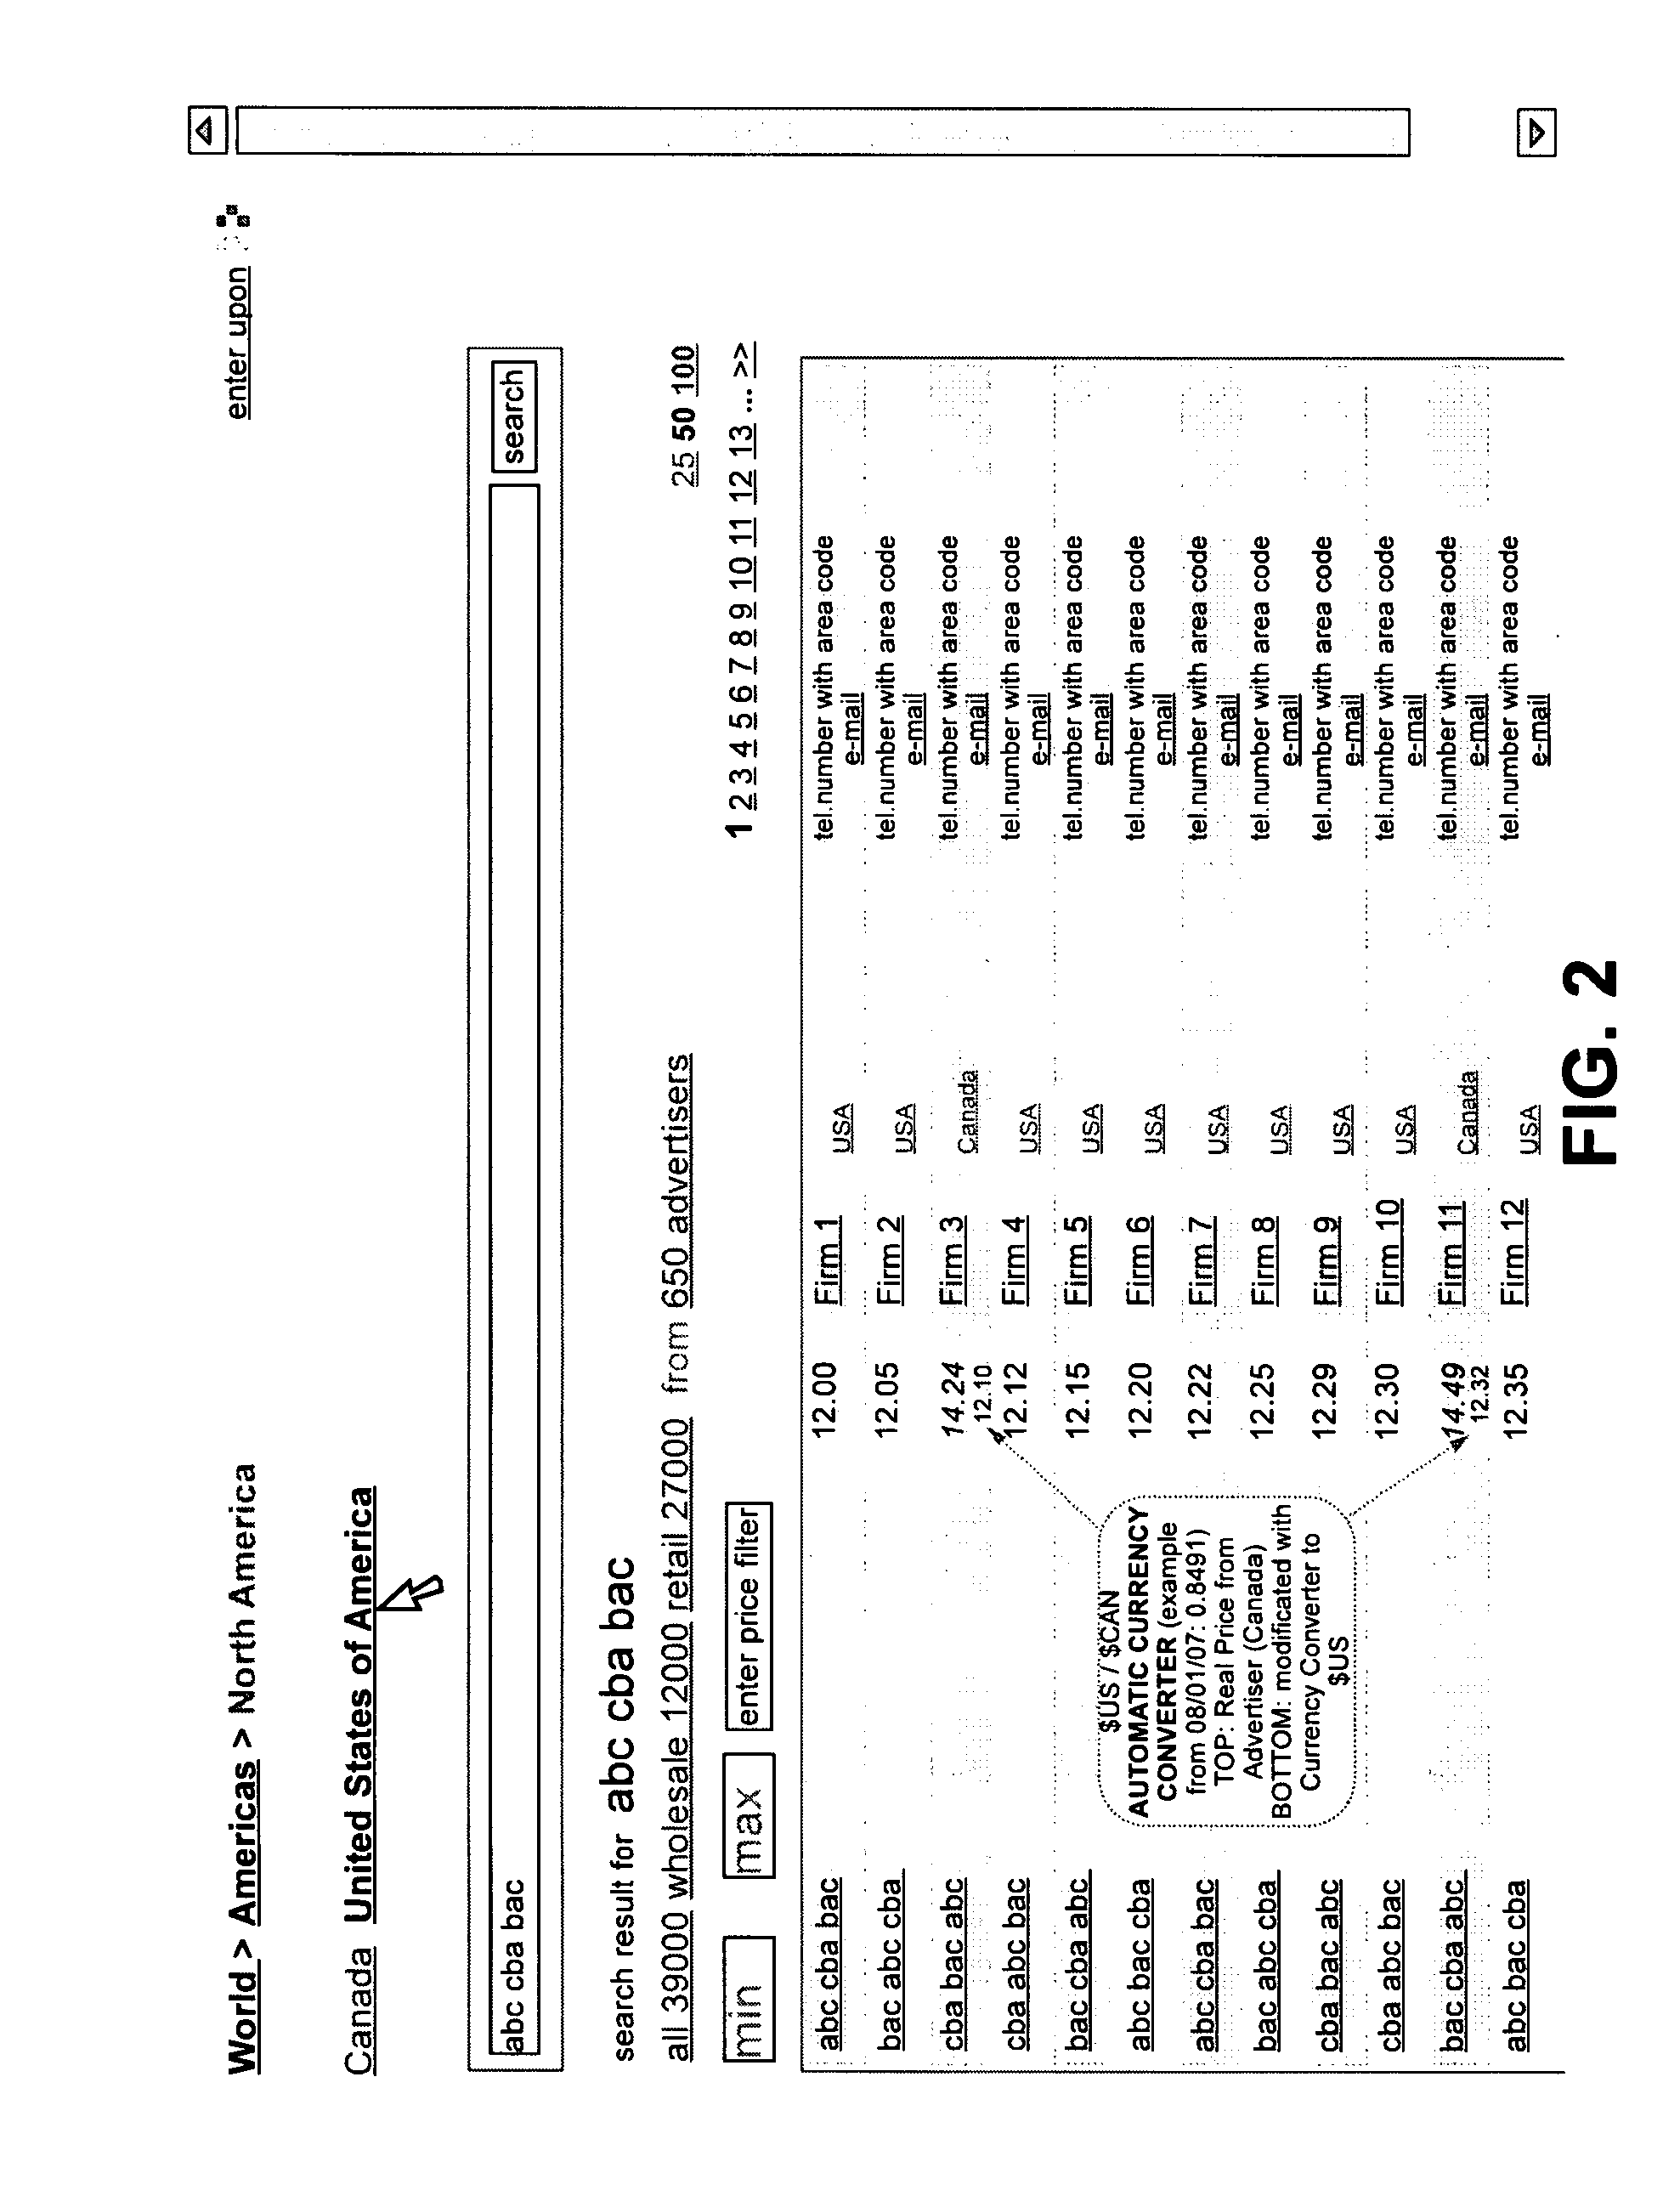 Network information distribution system and a method of advertising and search for supply and demand of products/goods/services in any geographical location